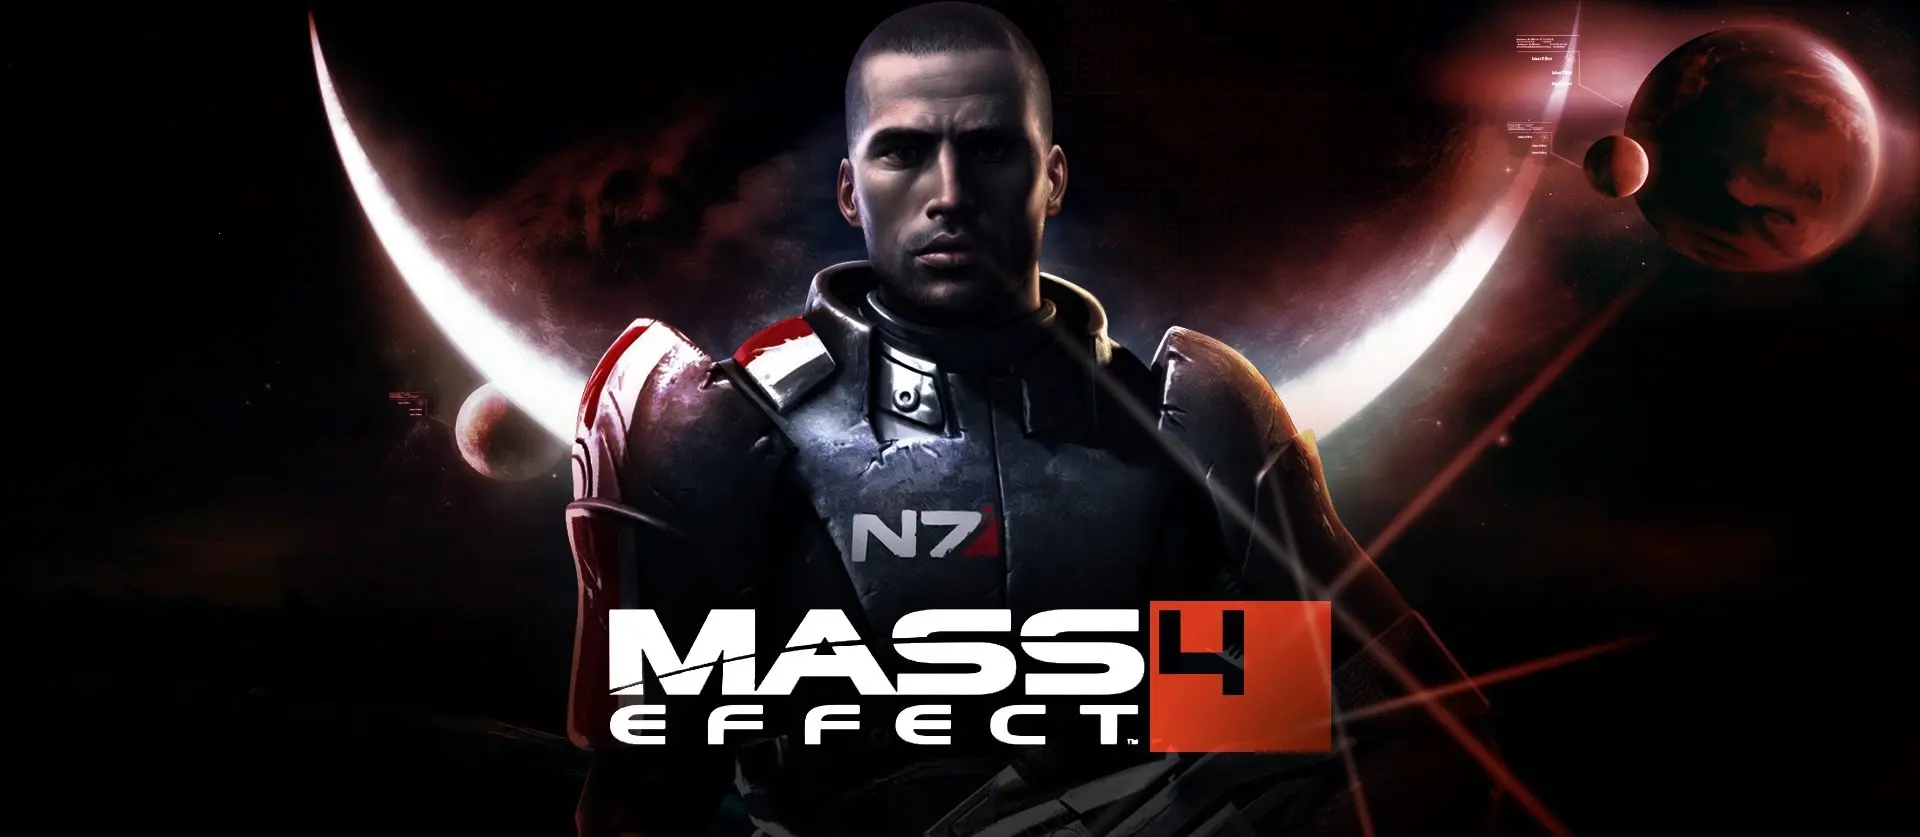 Game Mass Effect 4 New Age wallpaper 2 | Background Image